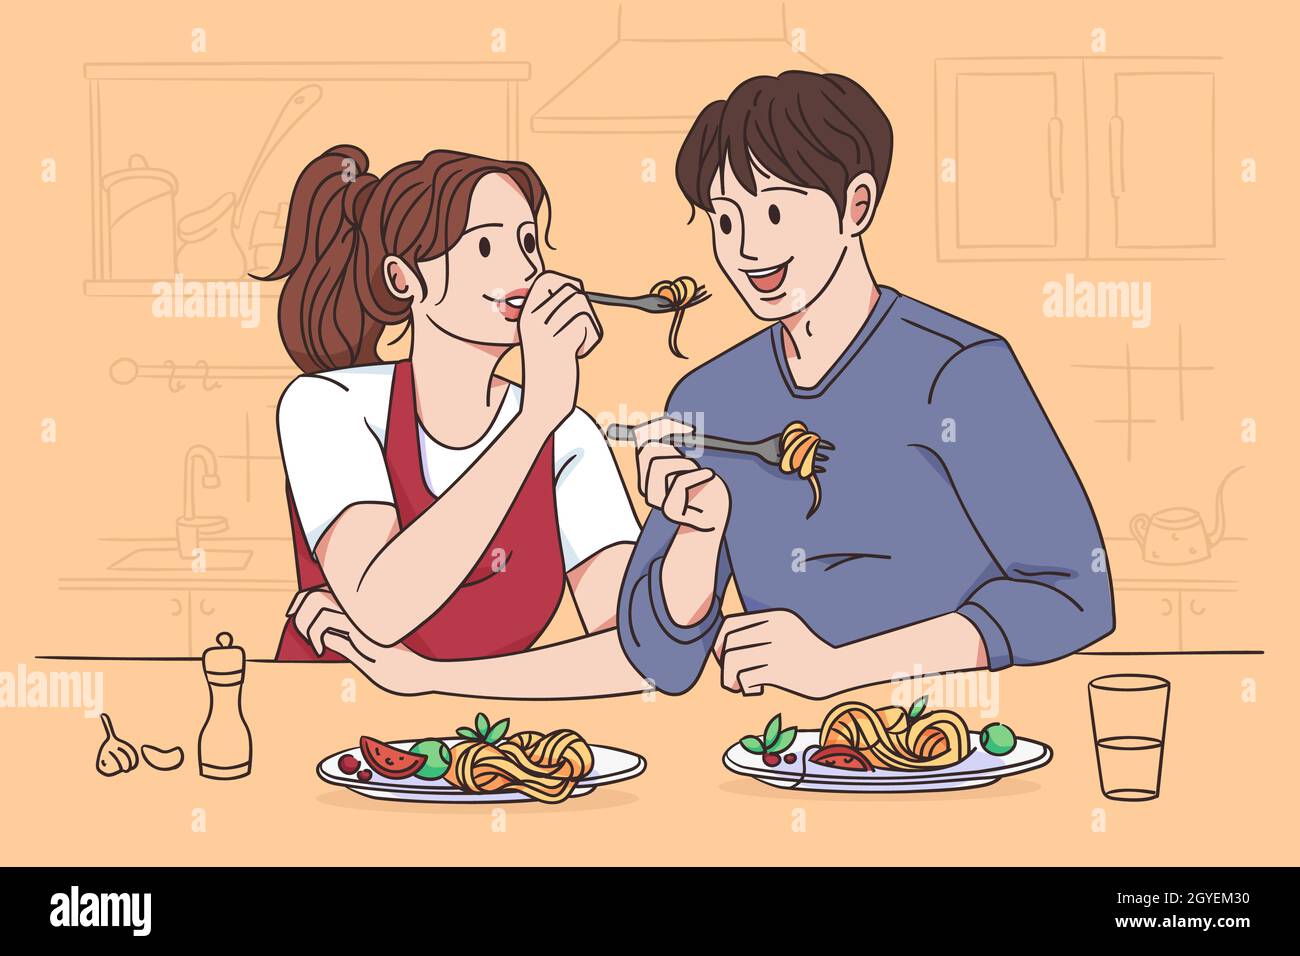 Eating pasta together concept. Young happy couple cartoon characters  sitting at table eating fresh italian cuisine pasta noodles together vector  illus Stock Photo - Alamy